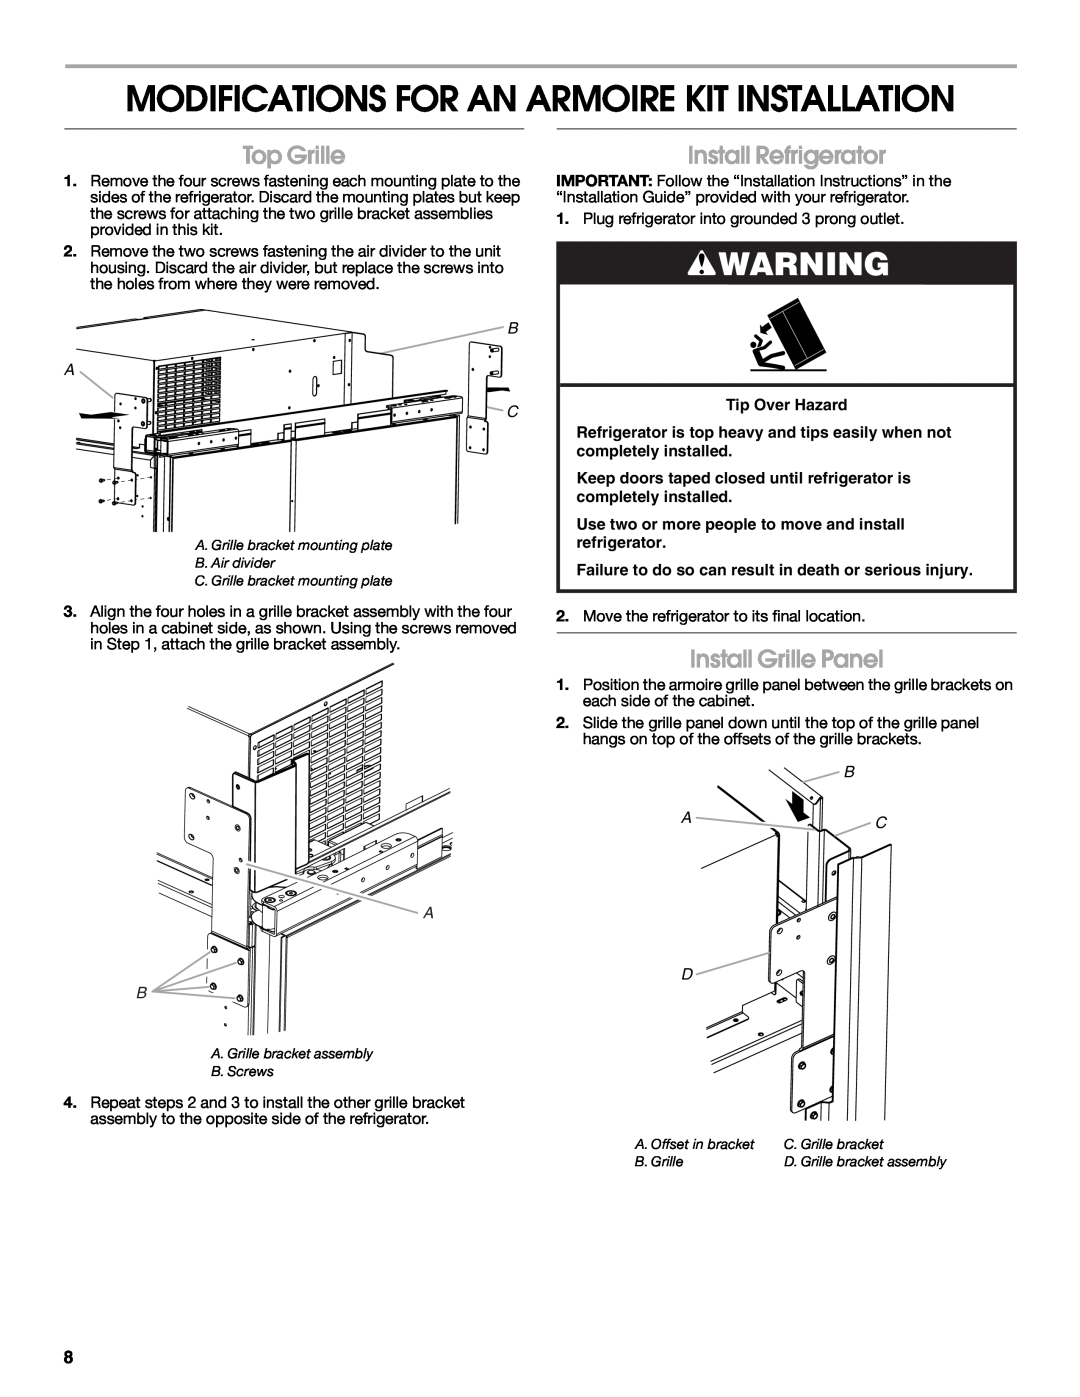 Jenn-Air W10295557C Modifications For An Armoire Kit Installation, Top Grille, Install Refrigerator, Install Grille Panel 